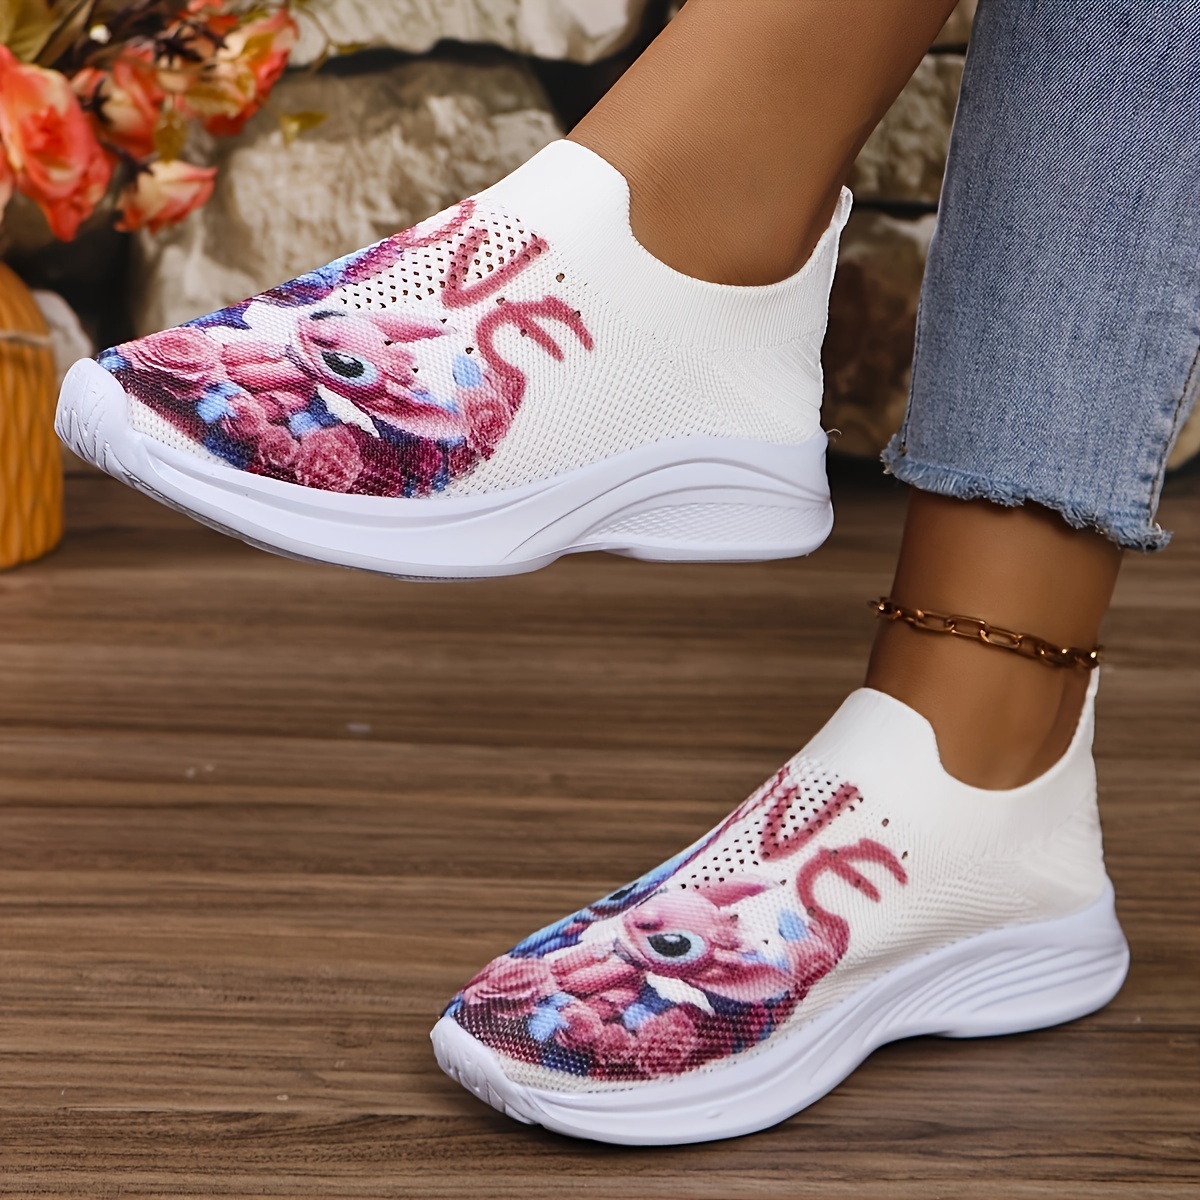 

Women's Walking Shoes, Breathable Sneakers With Whimsical Animal Print, Comfort Casual Camp Shoes, Slip-on Lightweight Design